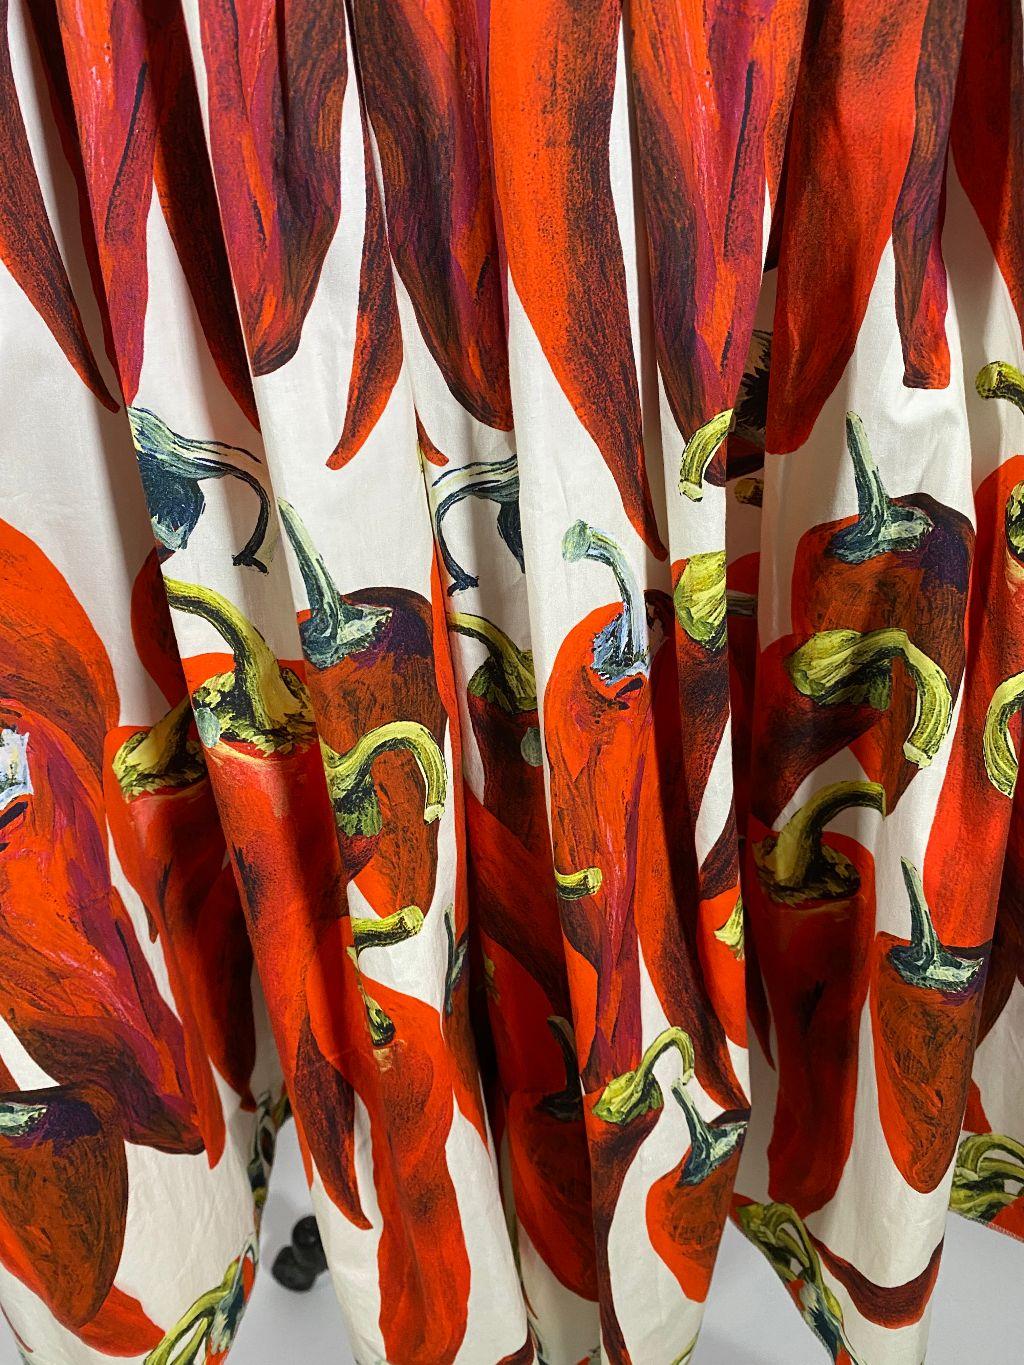 Dolce & Gabbana Chili Peppers Print  Skirt 
New Without Tags ,no stains .Looks unworn
SZ 44 IT 

Made in Italy 

Final Sale 


